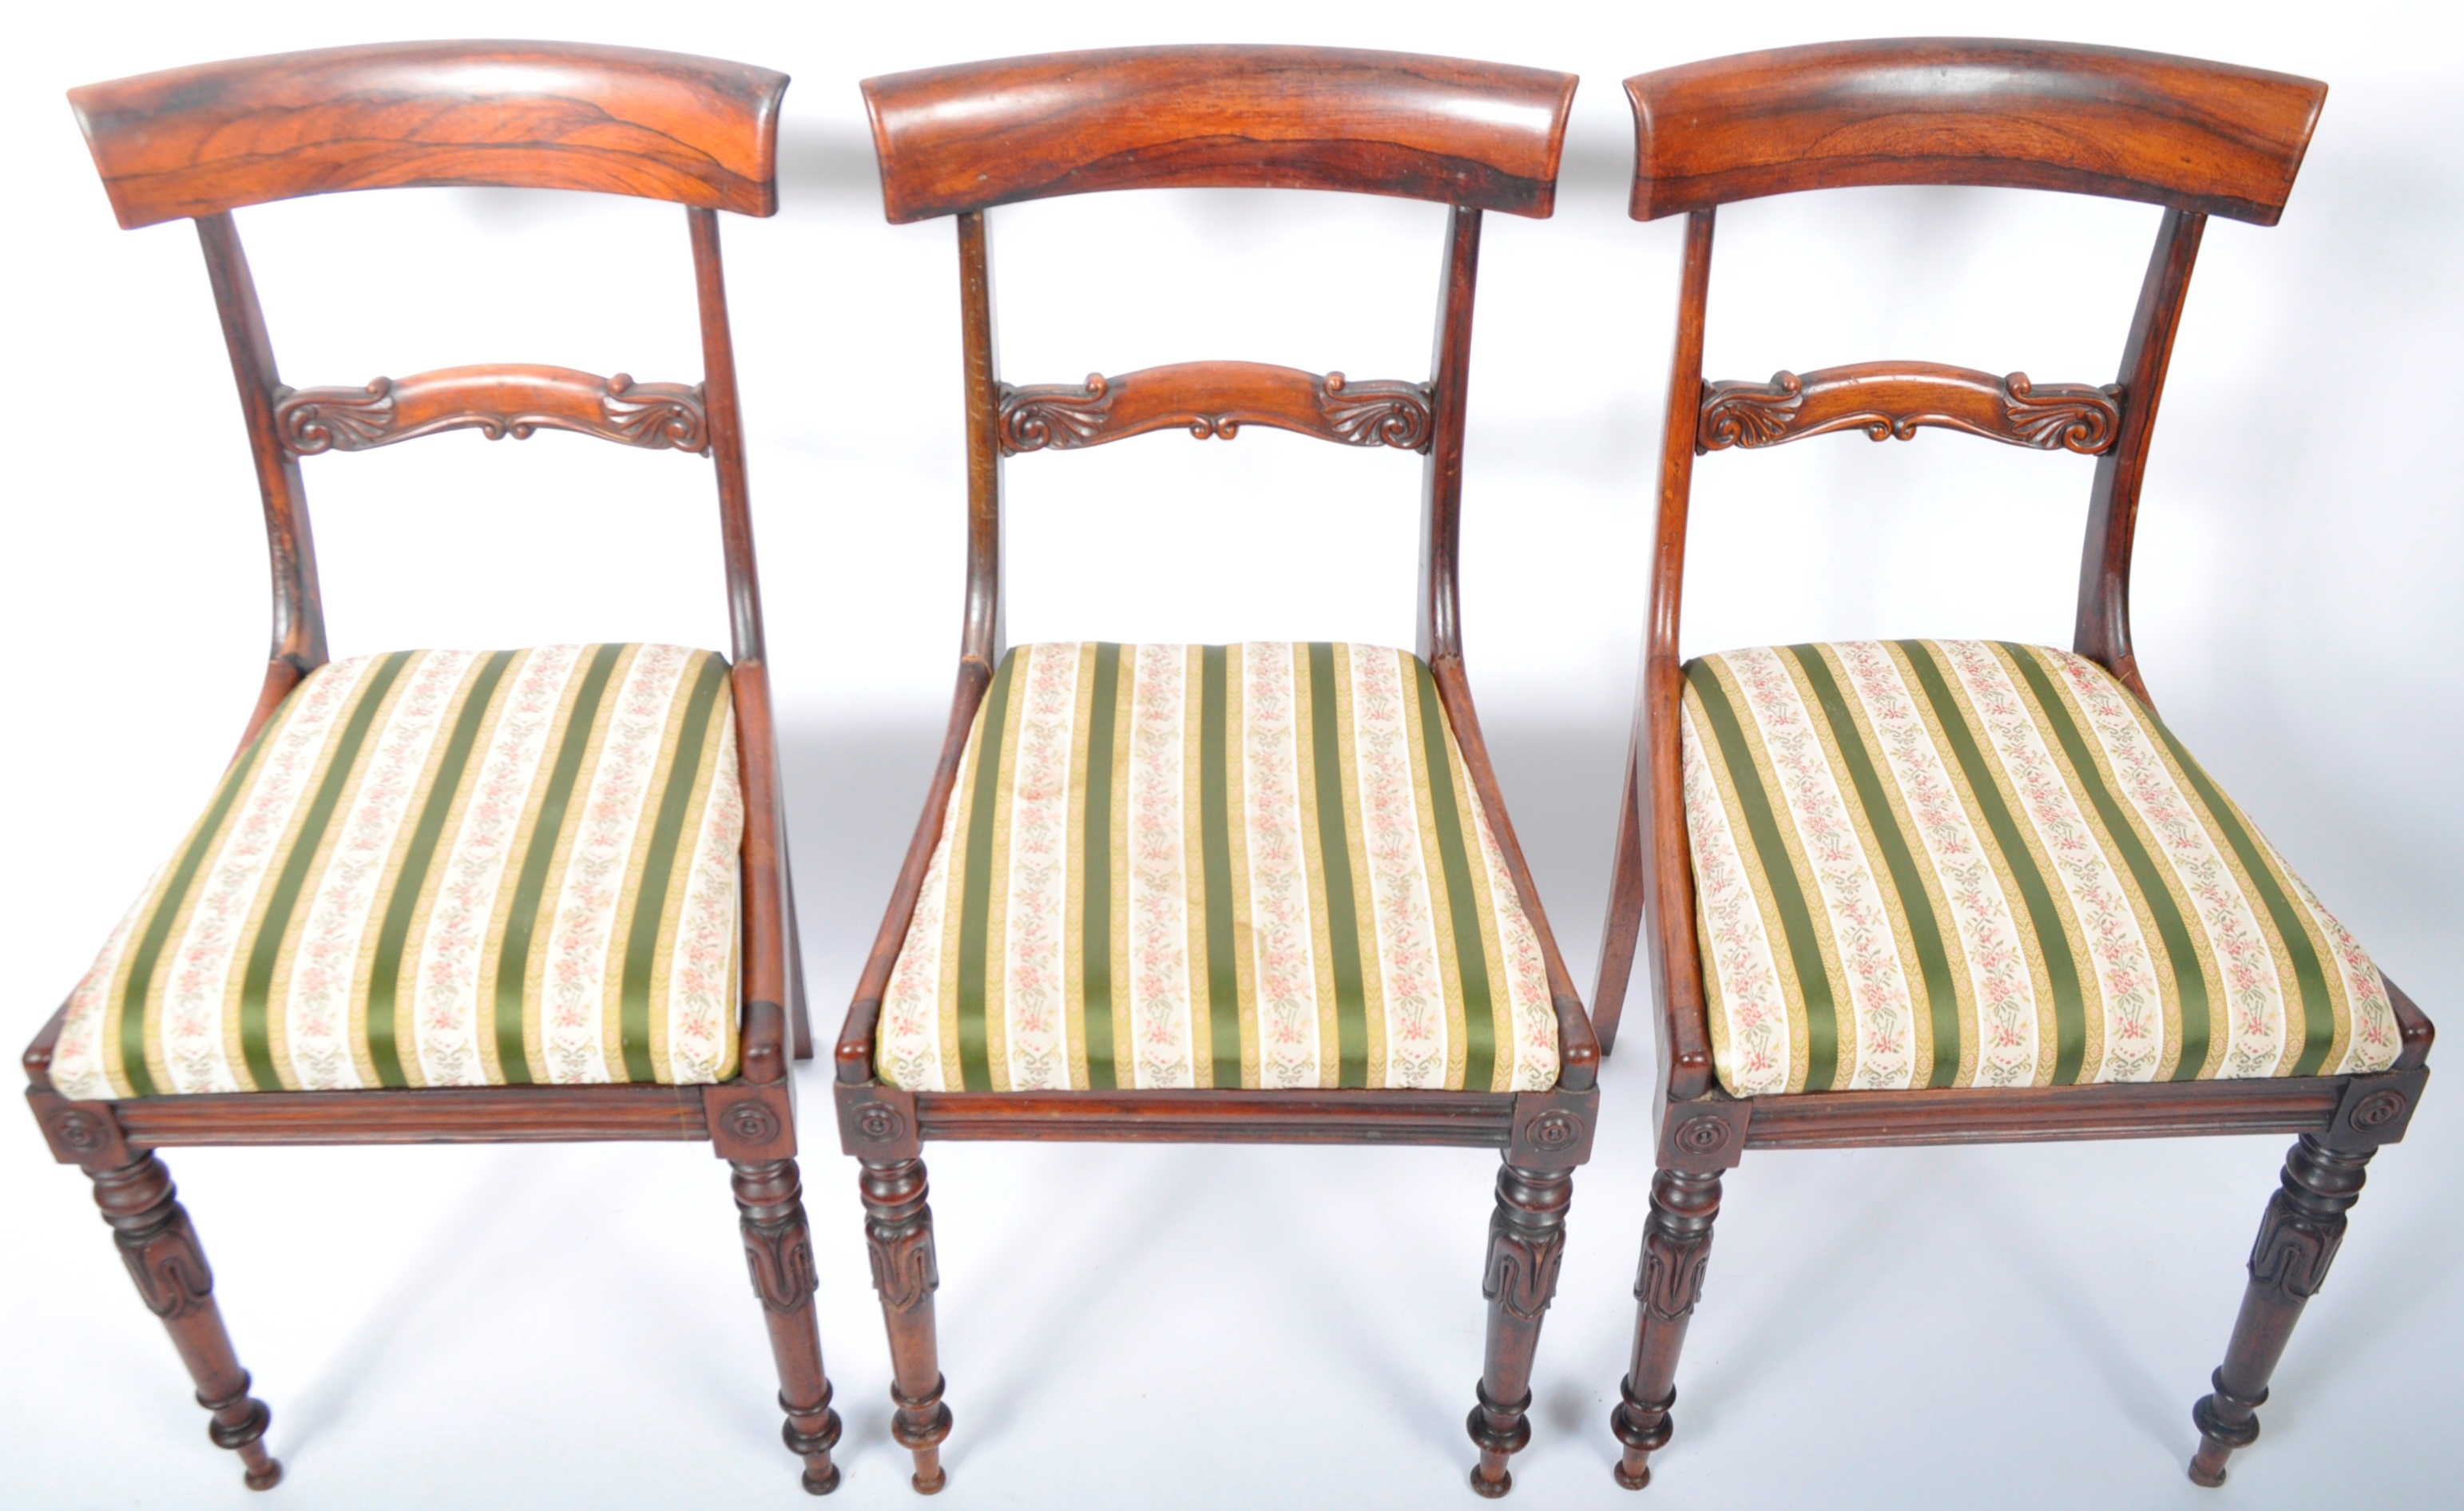 SIX 19TH CENTURY ROSEWOOD DINING CHAIRS IN THE GILLOWS MANNER - Image 2 of 11